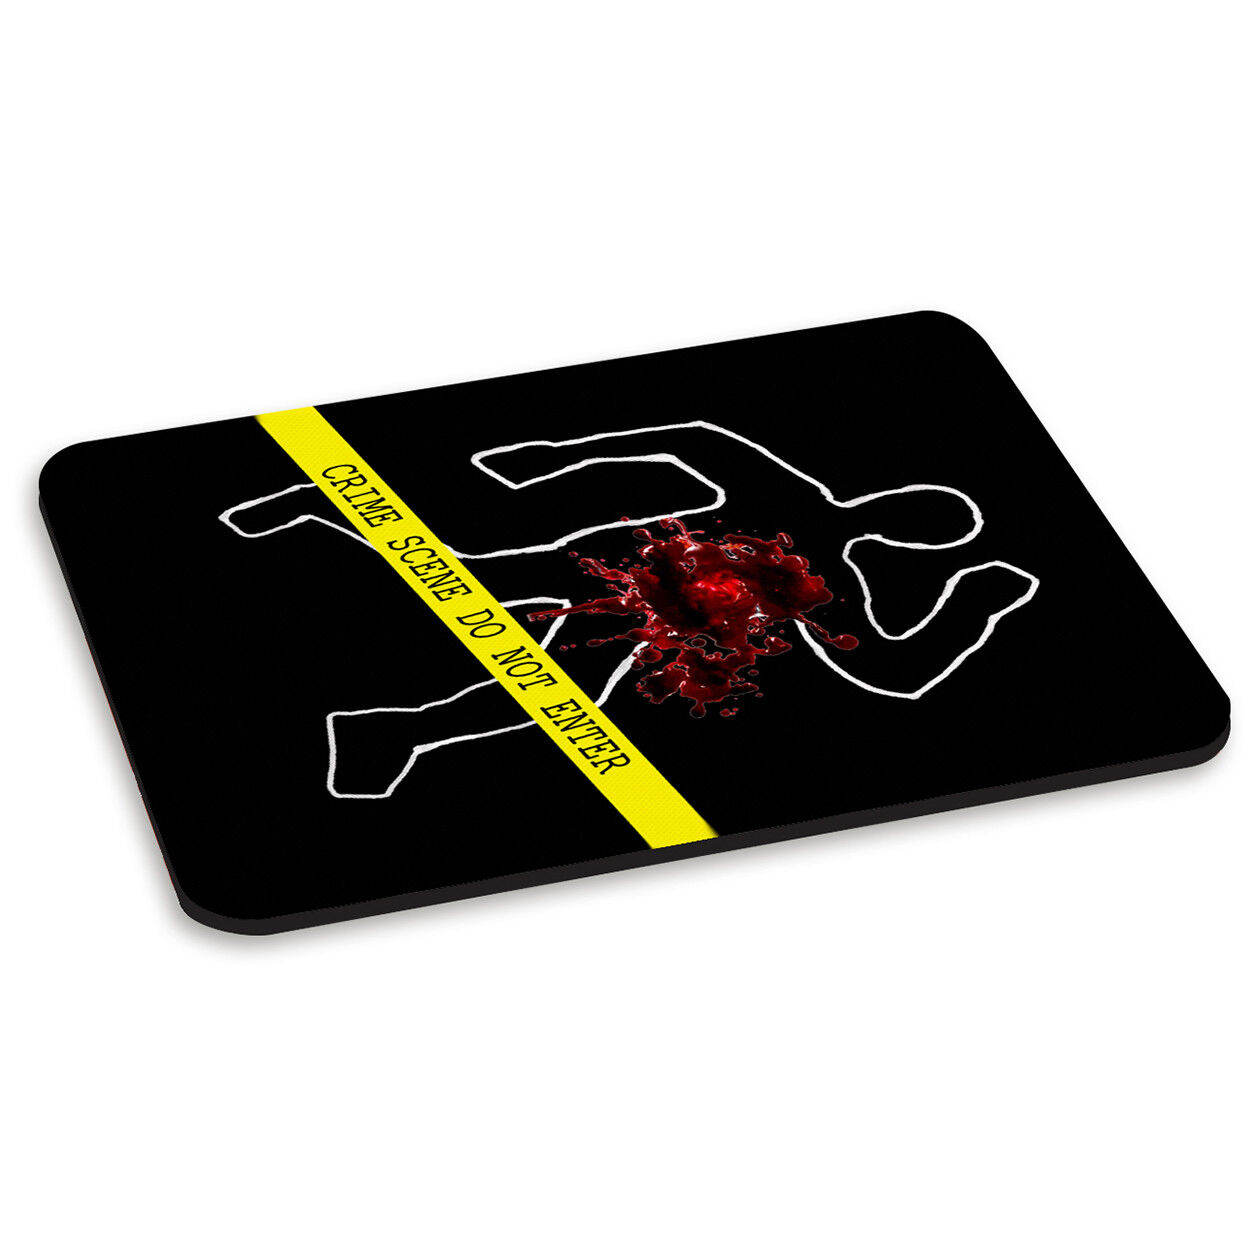 CRIME SCENE DO NOT ENTER PC COMPUTER MOUSE MAT PAD - Funny Police Blood Body